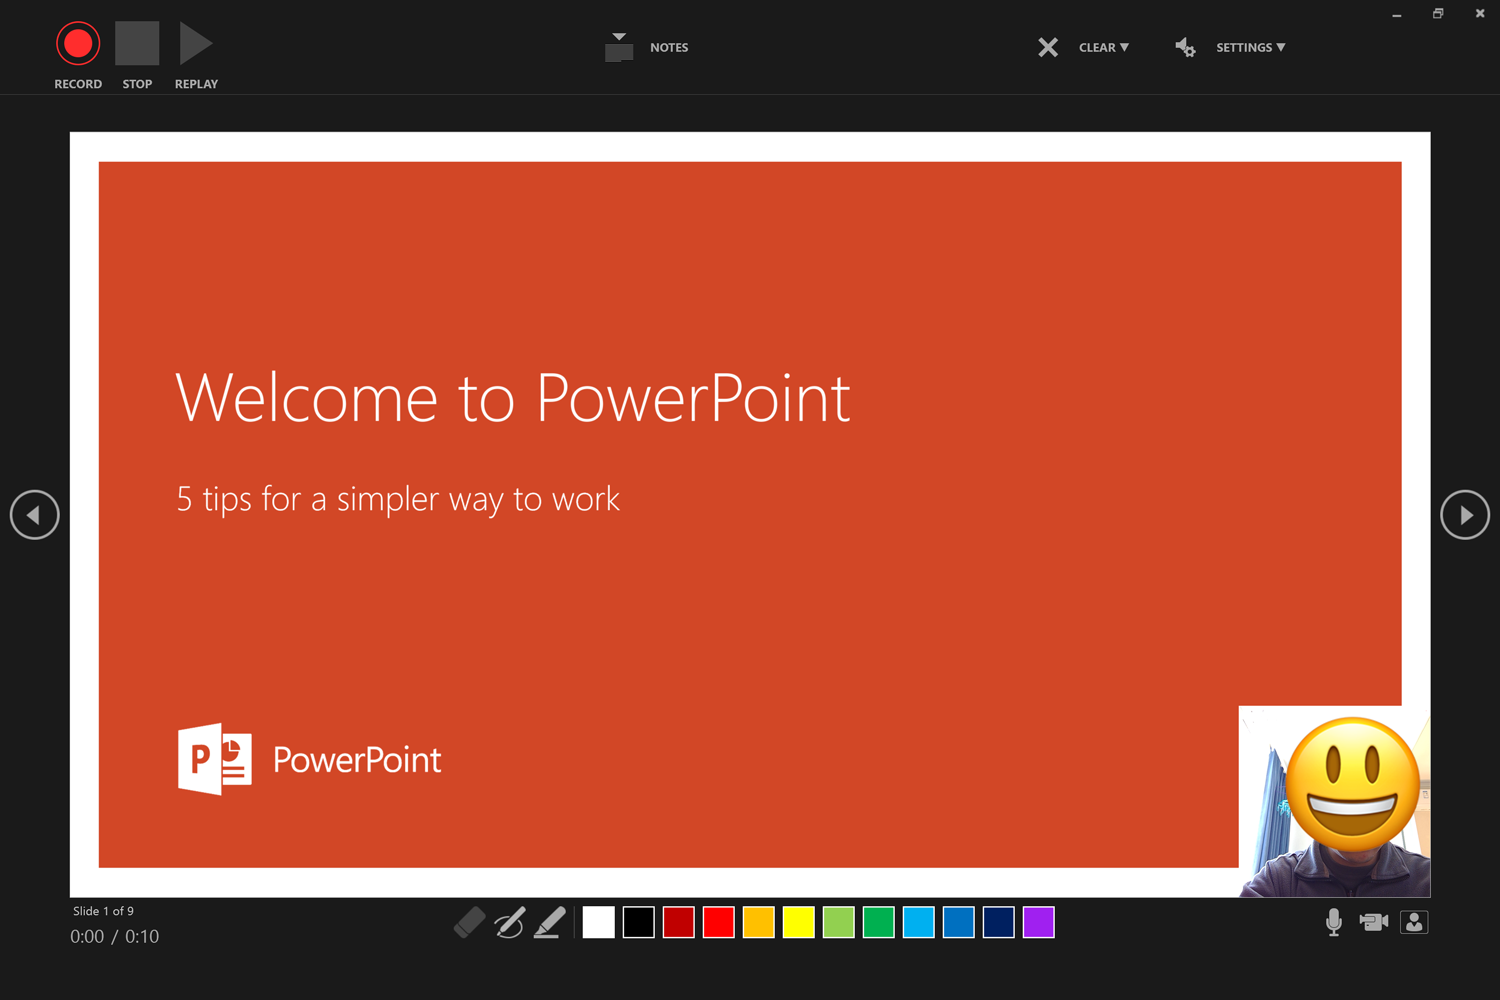 office365-powerpoint-screen-recording